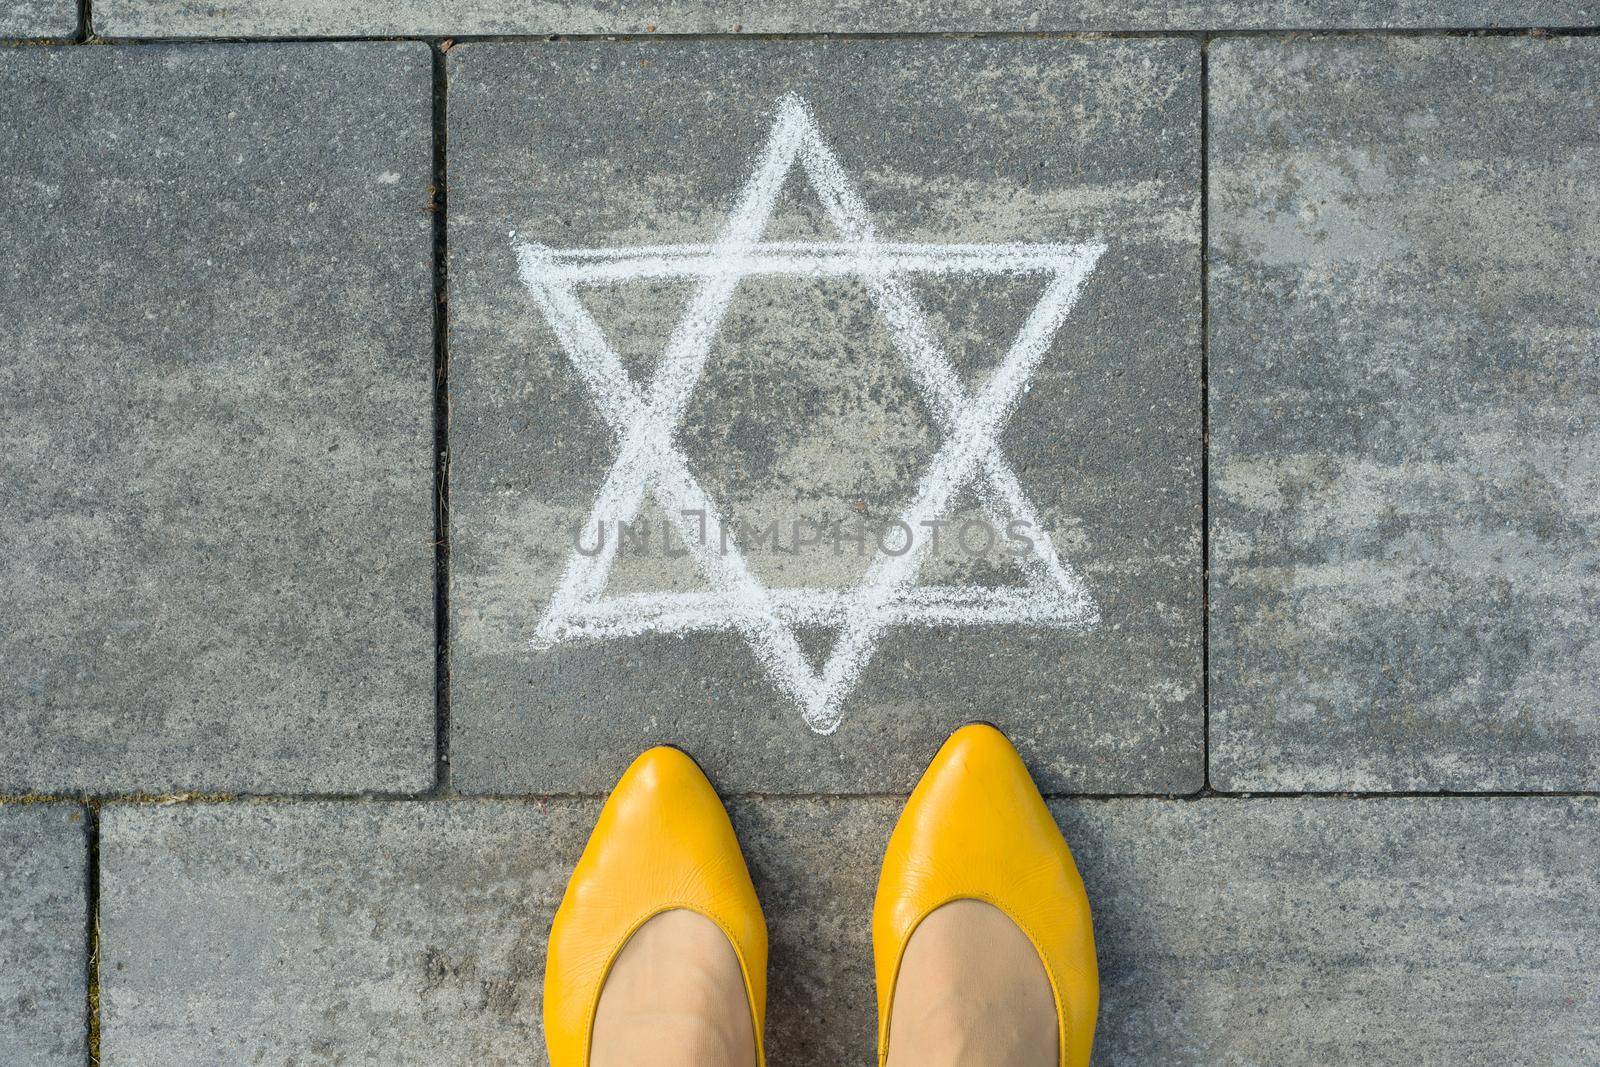 Female feet with abstract image of a six-pointed star, written on grey sidewalk